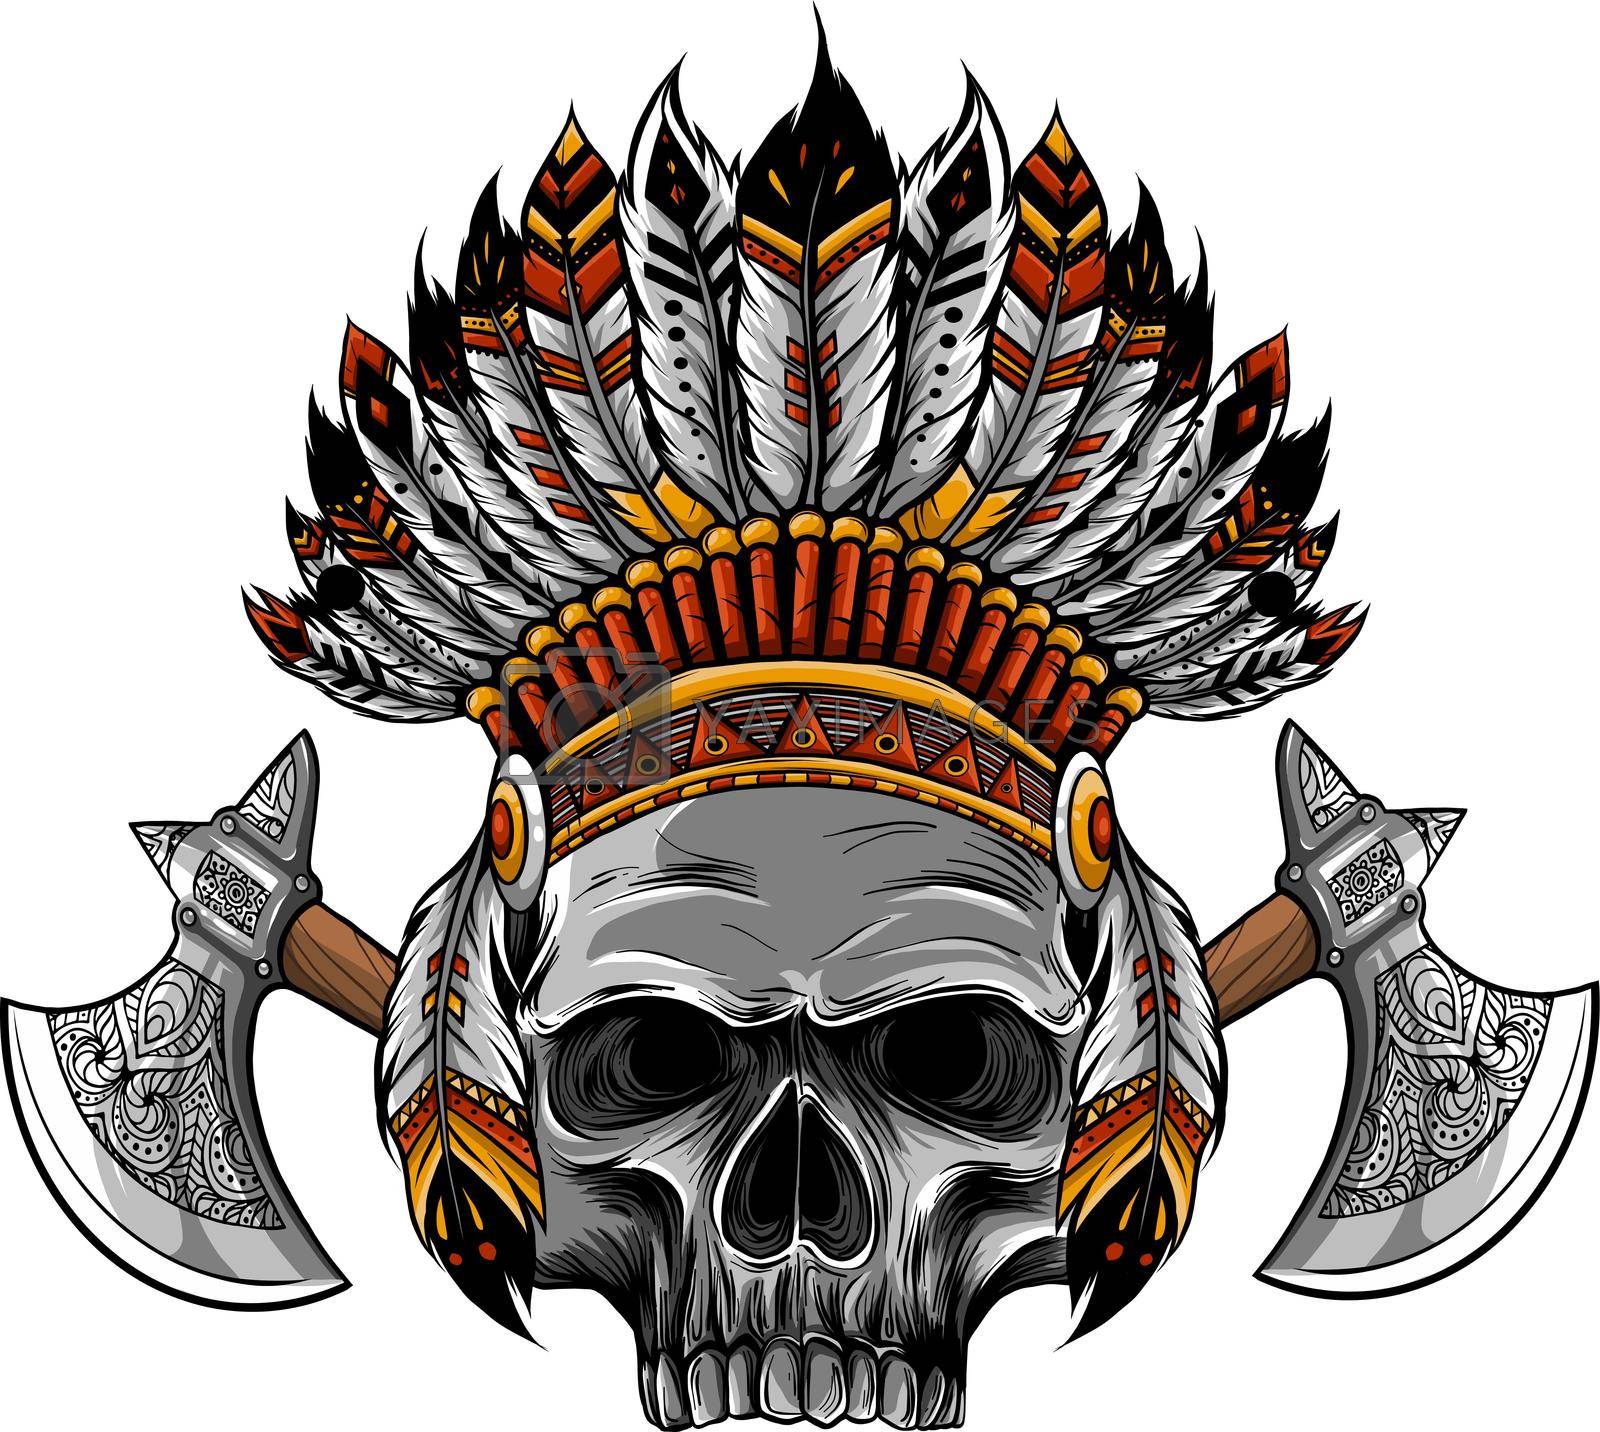 Royalty free image of Vector illustration of Indian skull and tomahawk by dean